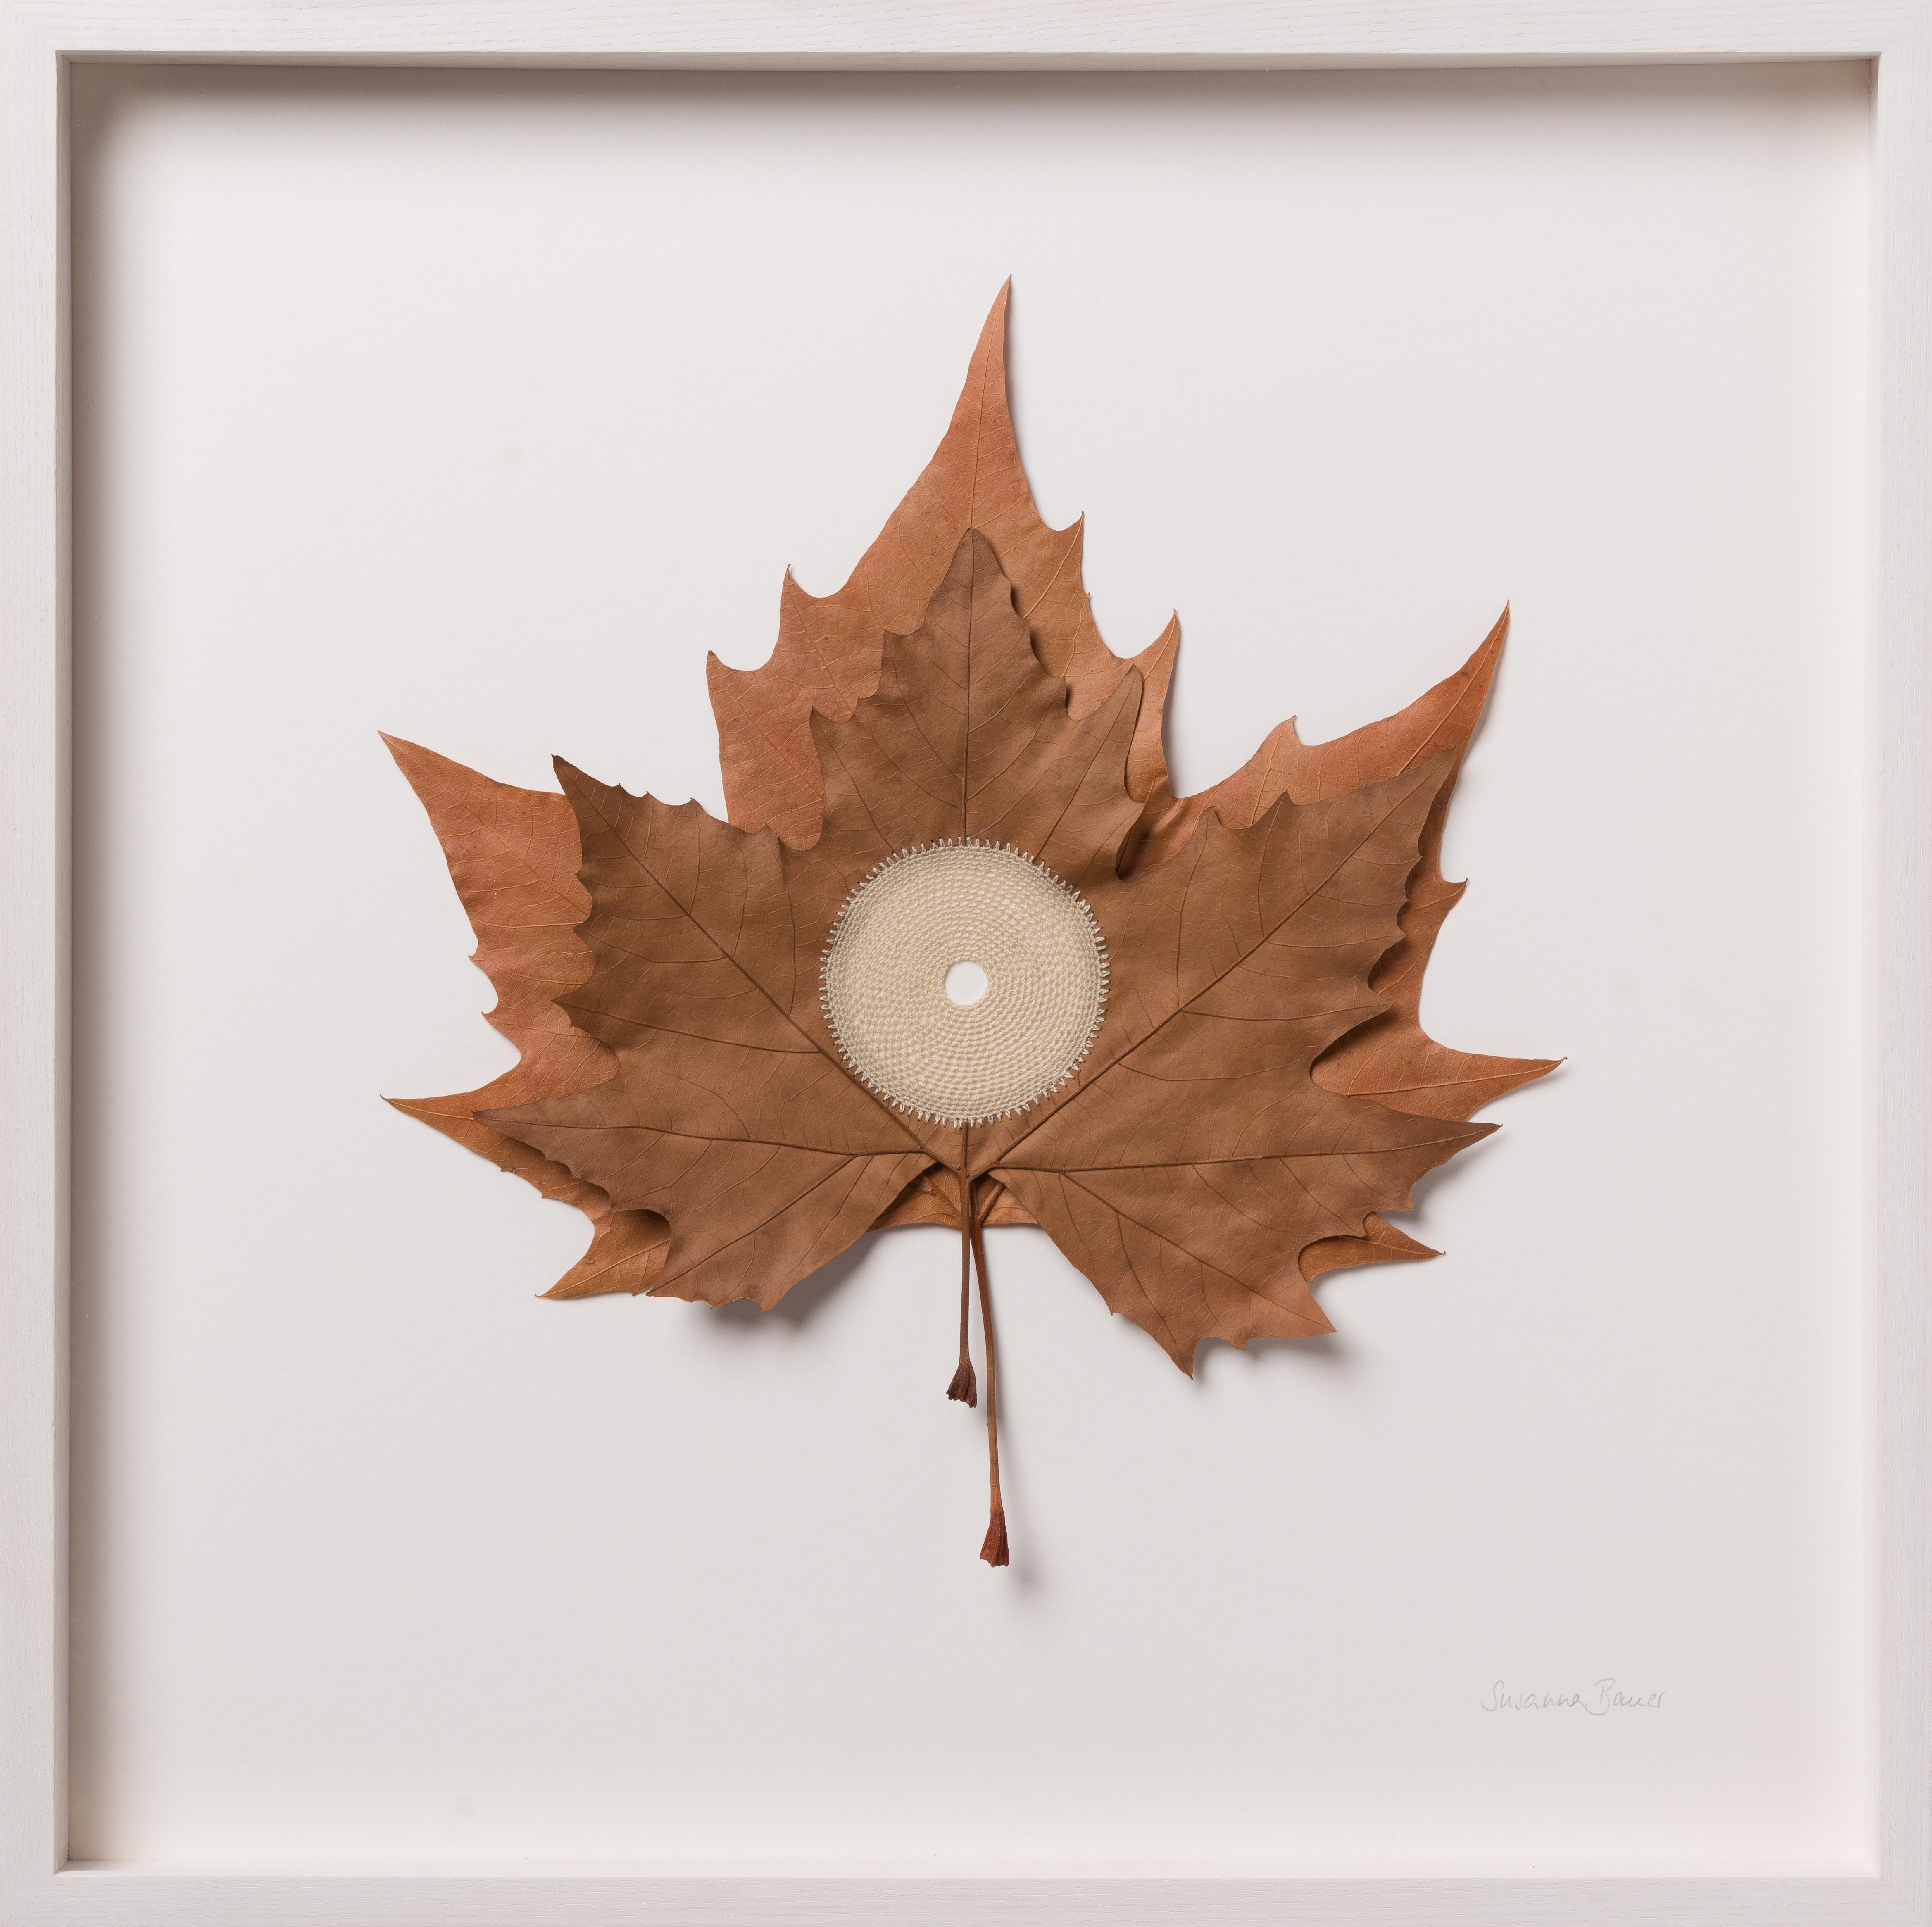 Centered XVII  - contemporary crochet dried plane tree leaves nature art framed - Mixed Media Art by Susanna Bauer